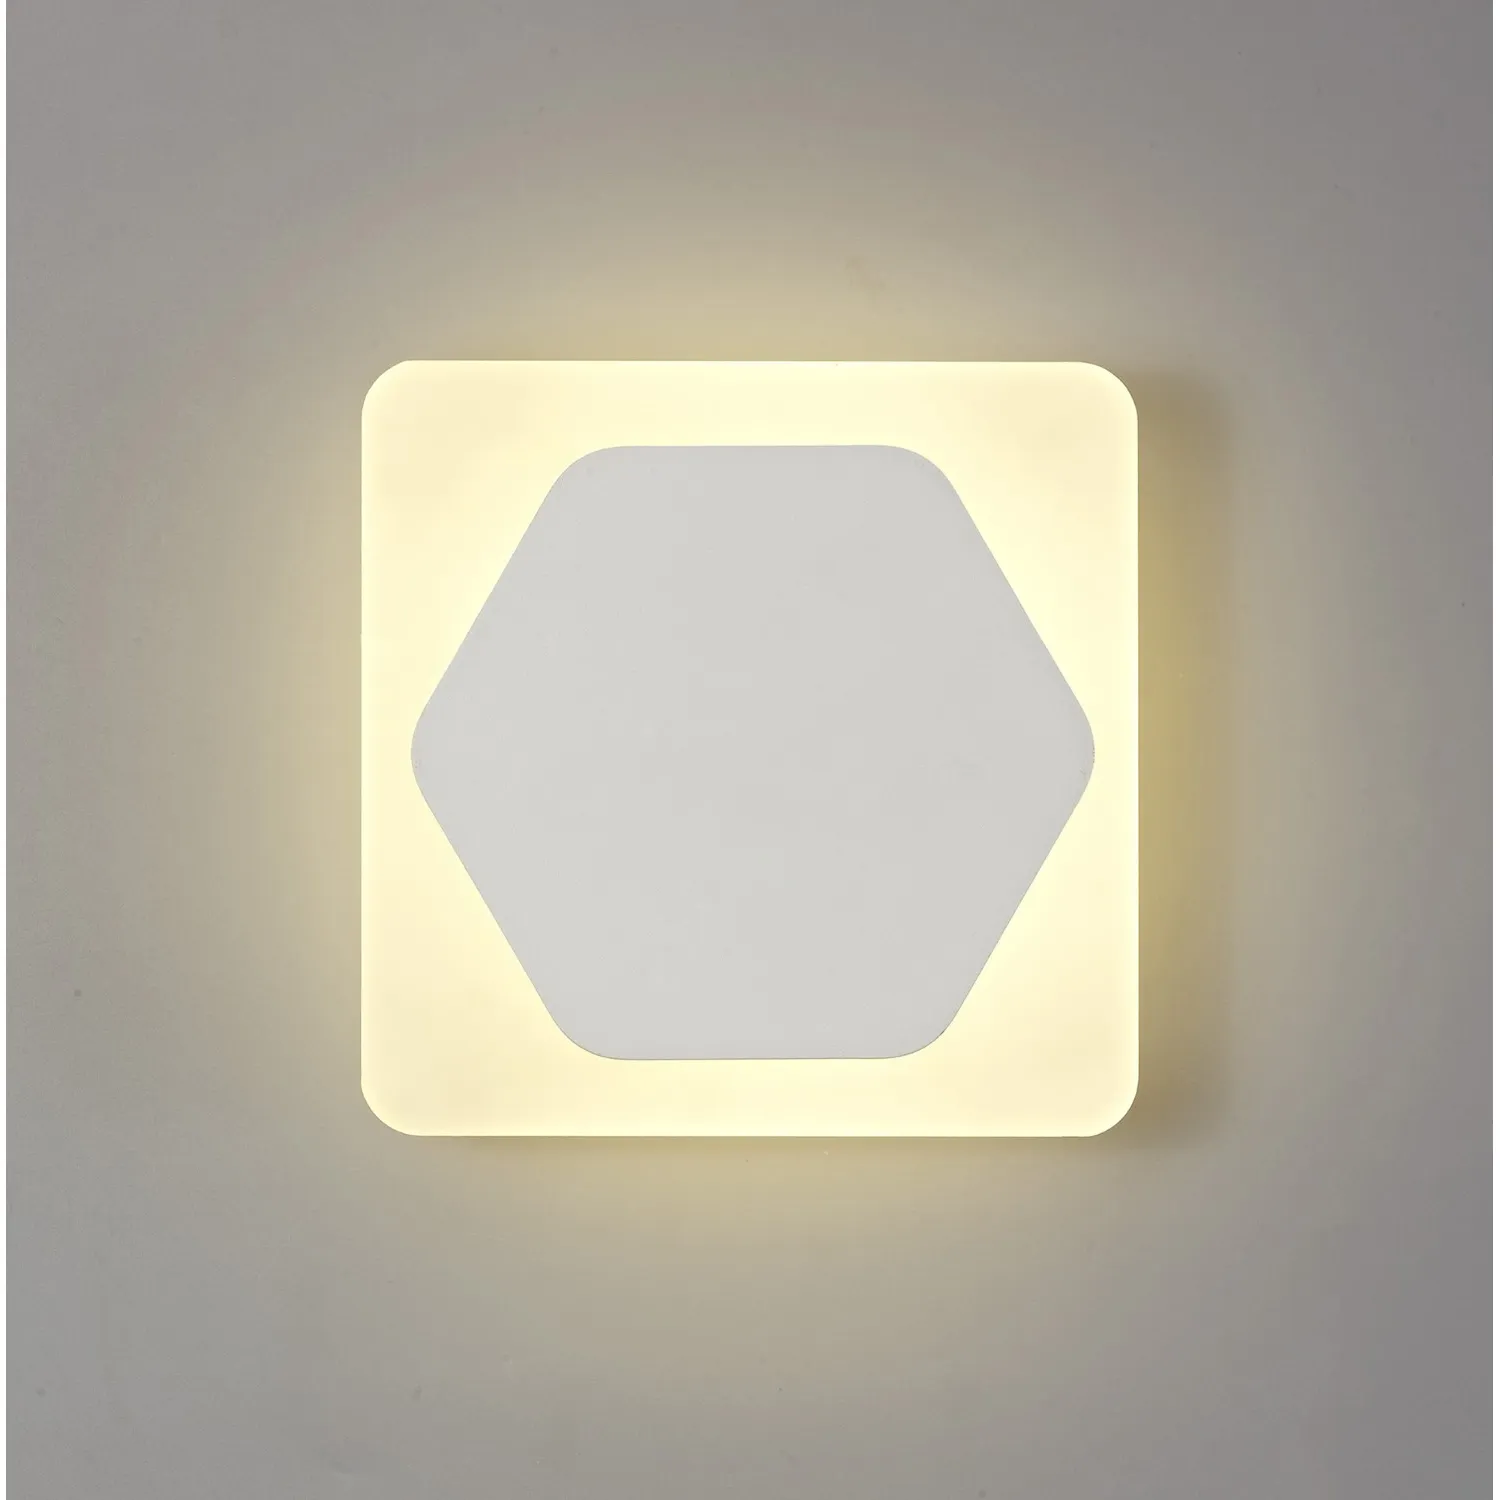 Edgware Magnetic Base Wall Lamp, 12W LED 3000K 498lm, 15cm Horizontal Hexagonal 19cm Square Centre, Sand White Acrylic Frosted Diffuser